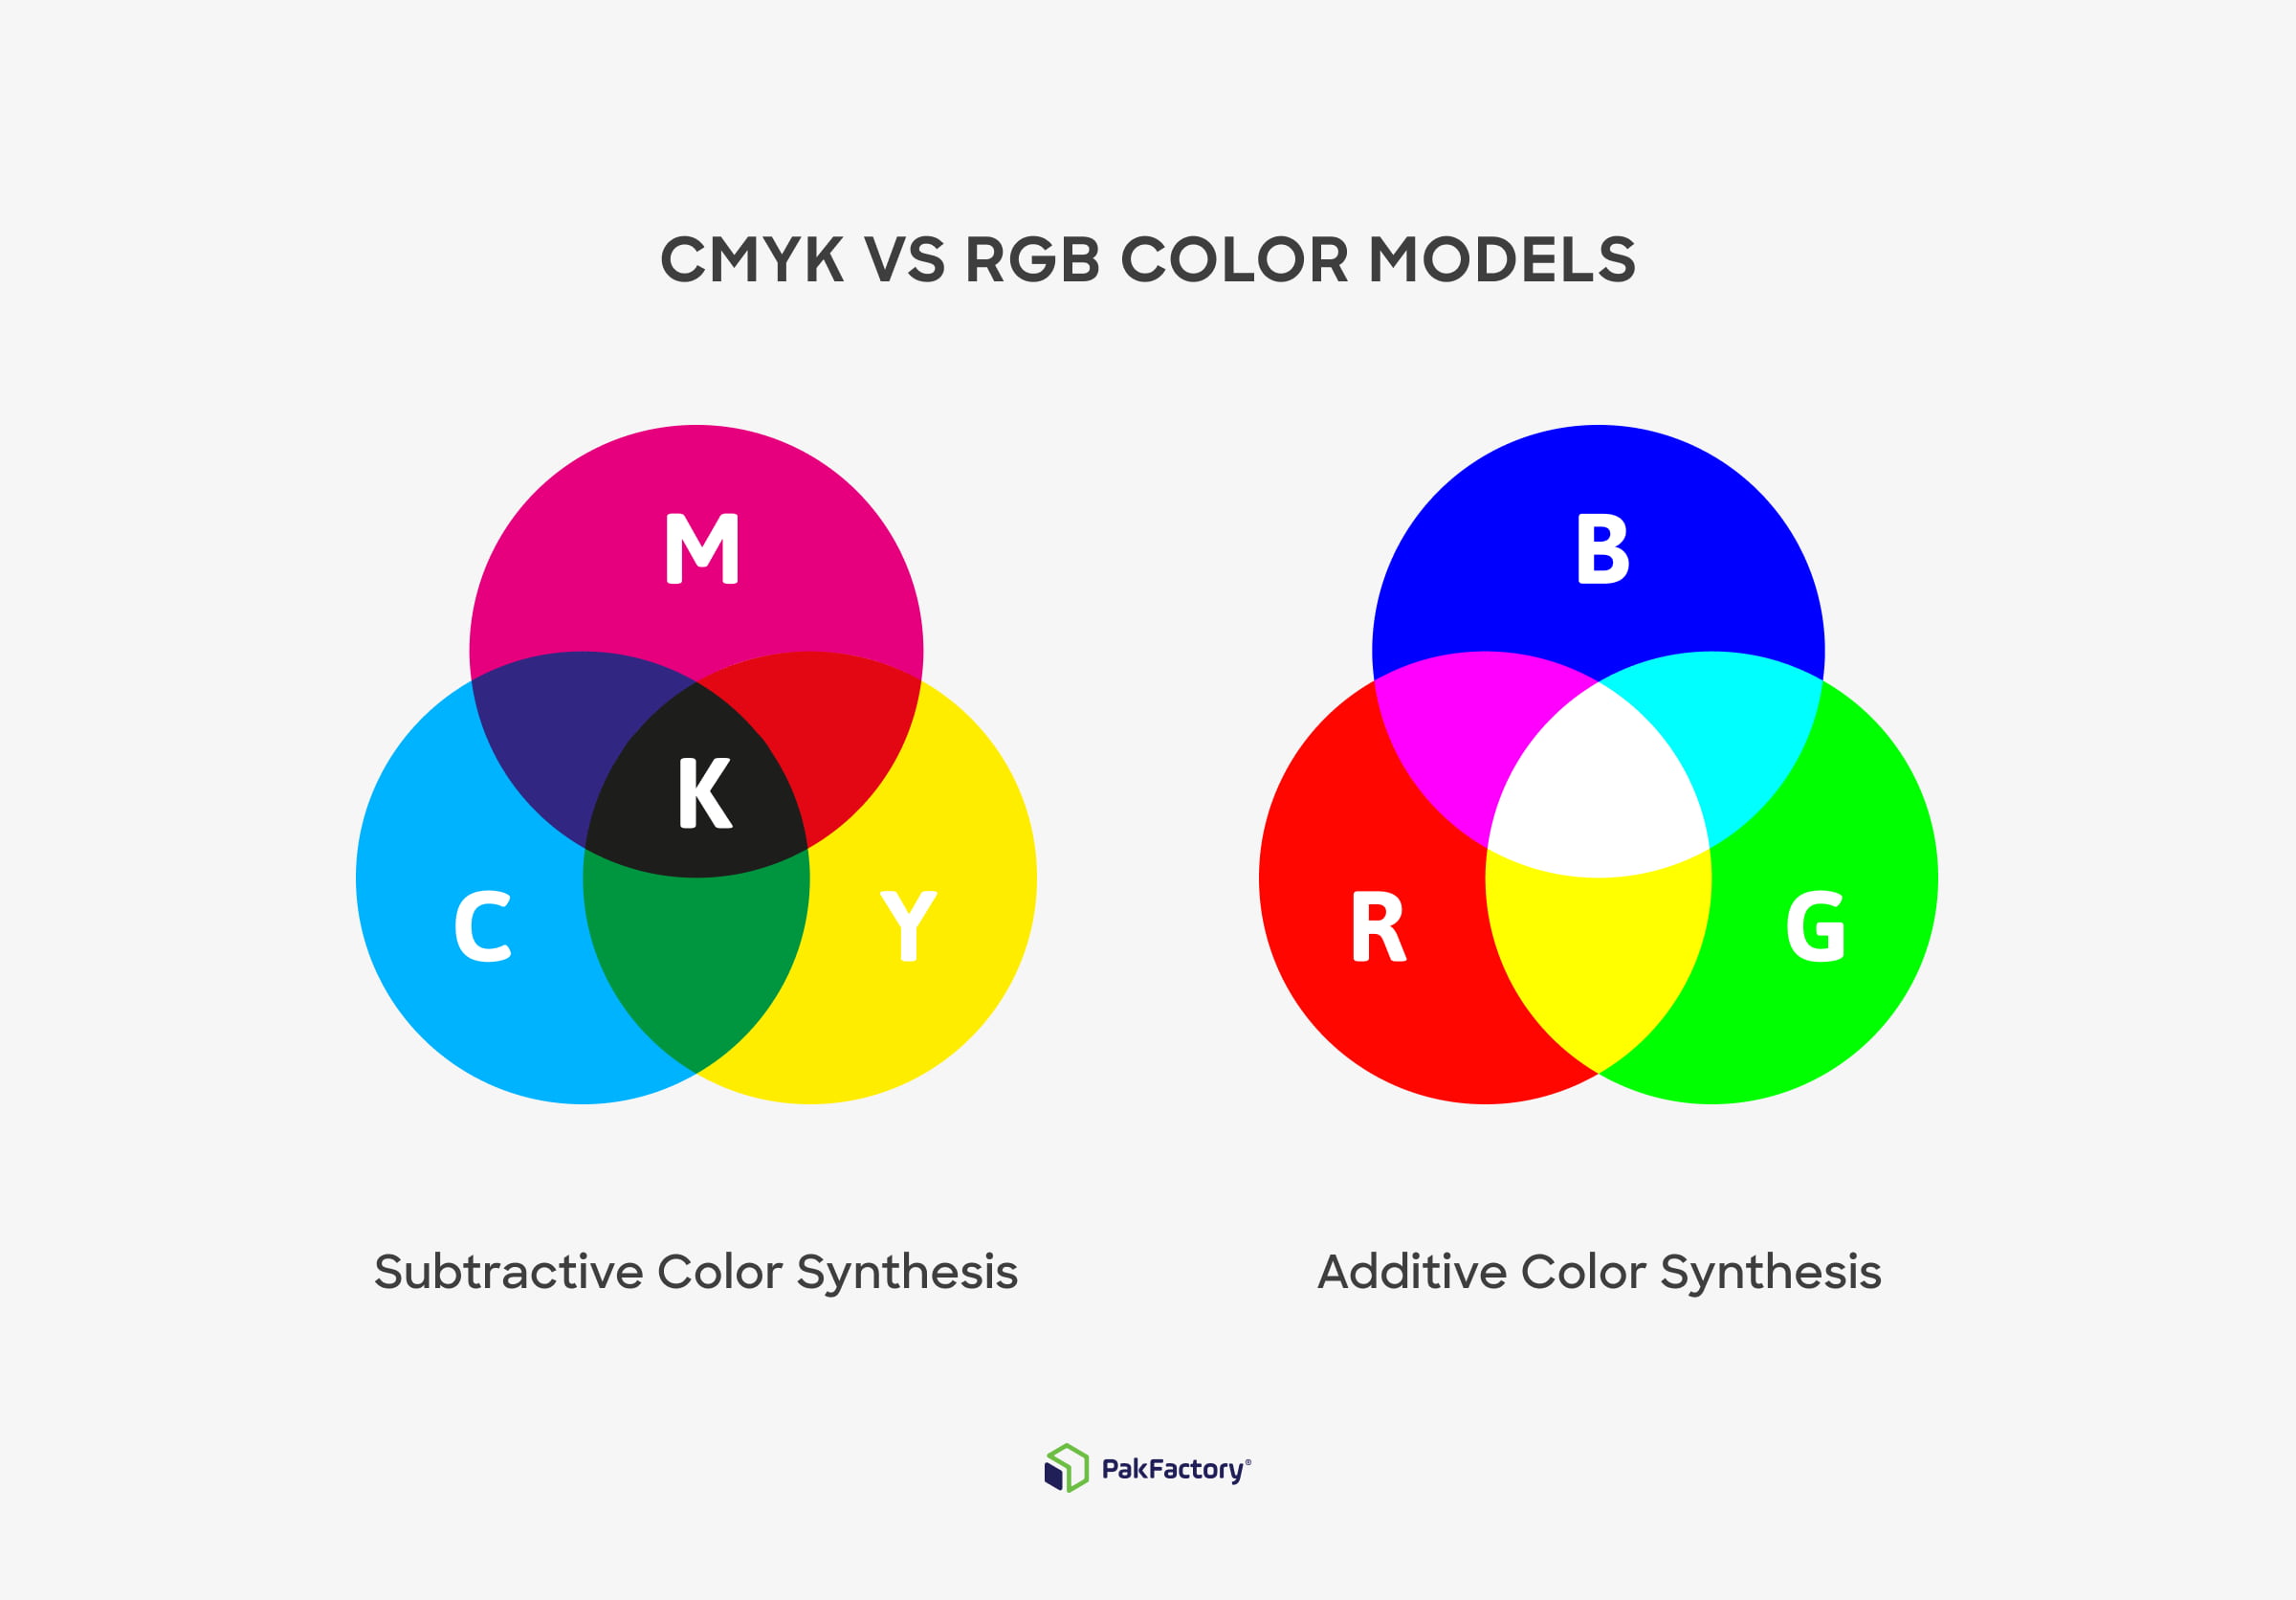 Additive color synthesis (RGB) and subtractive color synthesis (CMYK)